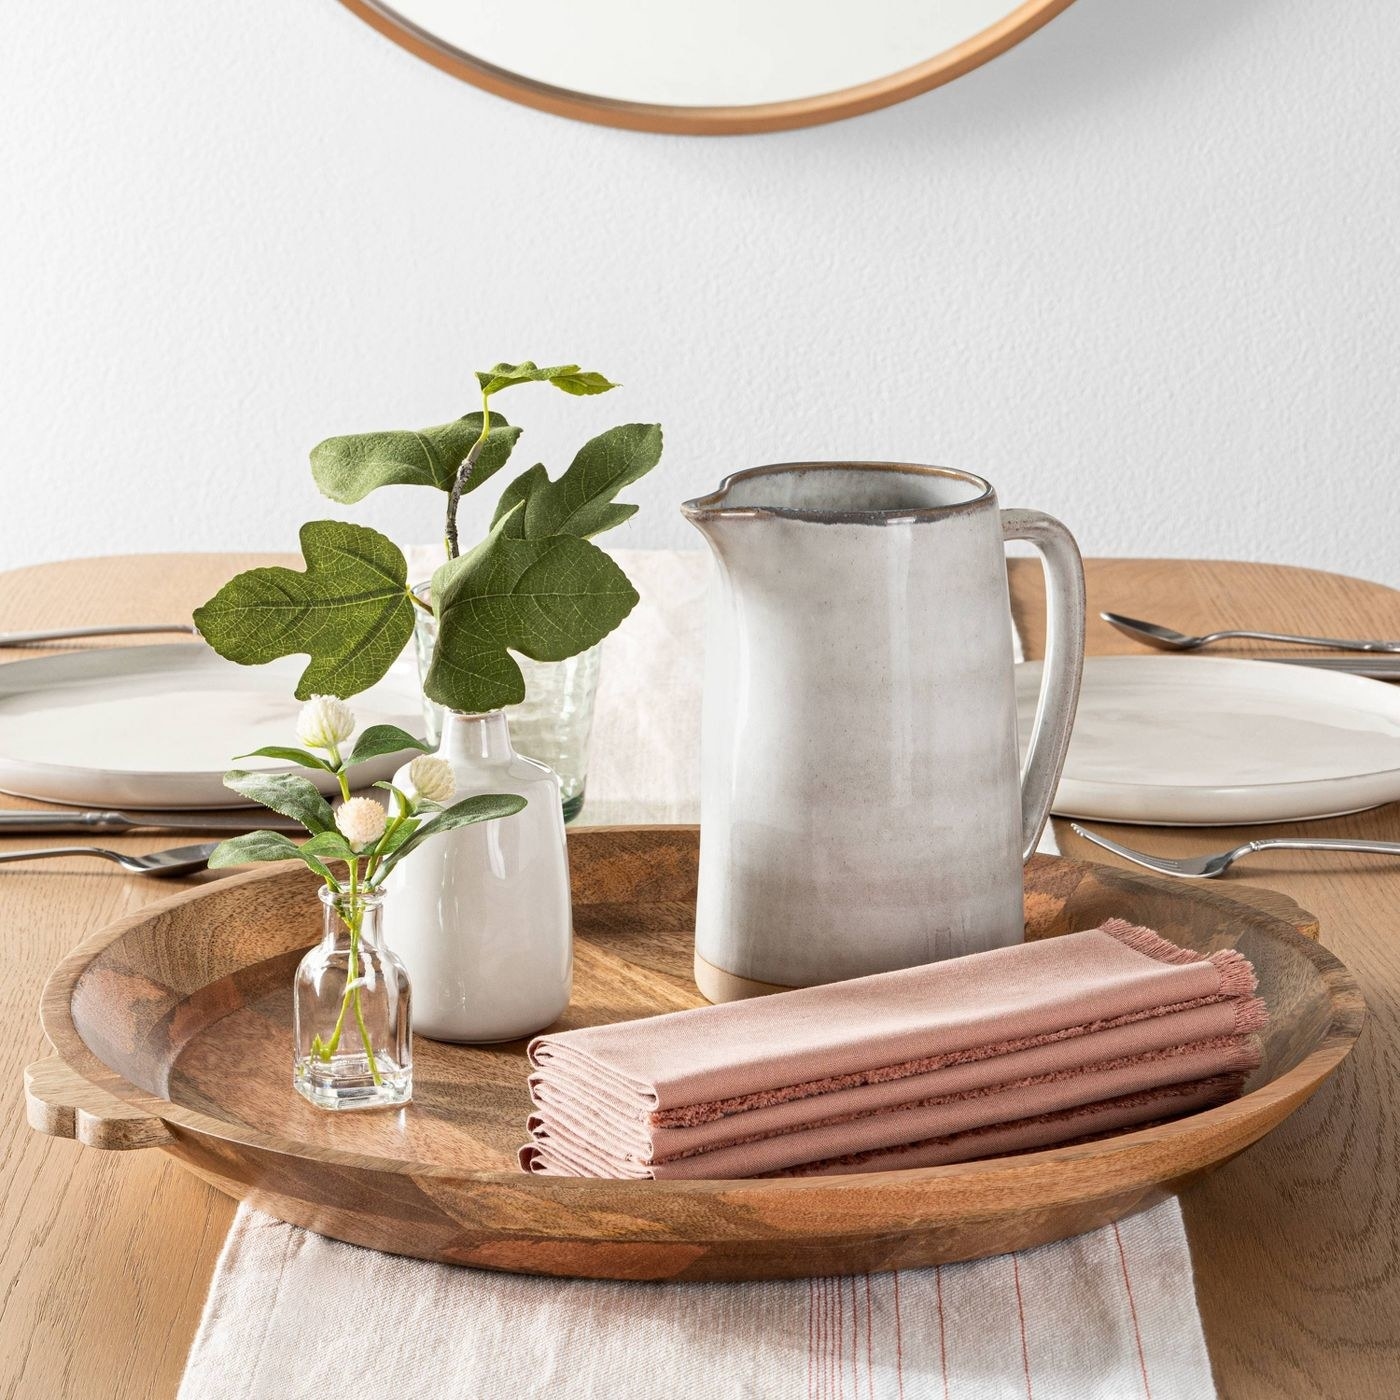 round wood tray with plants, a pitcher, and napkins on top, sitting on a table